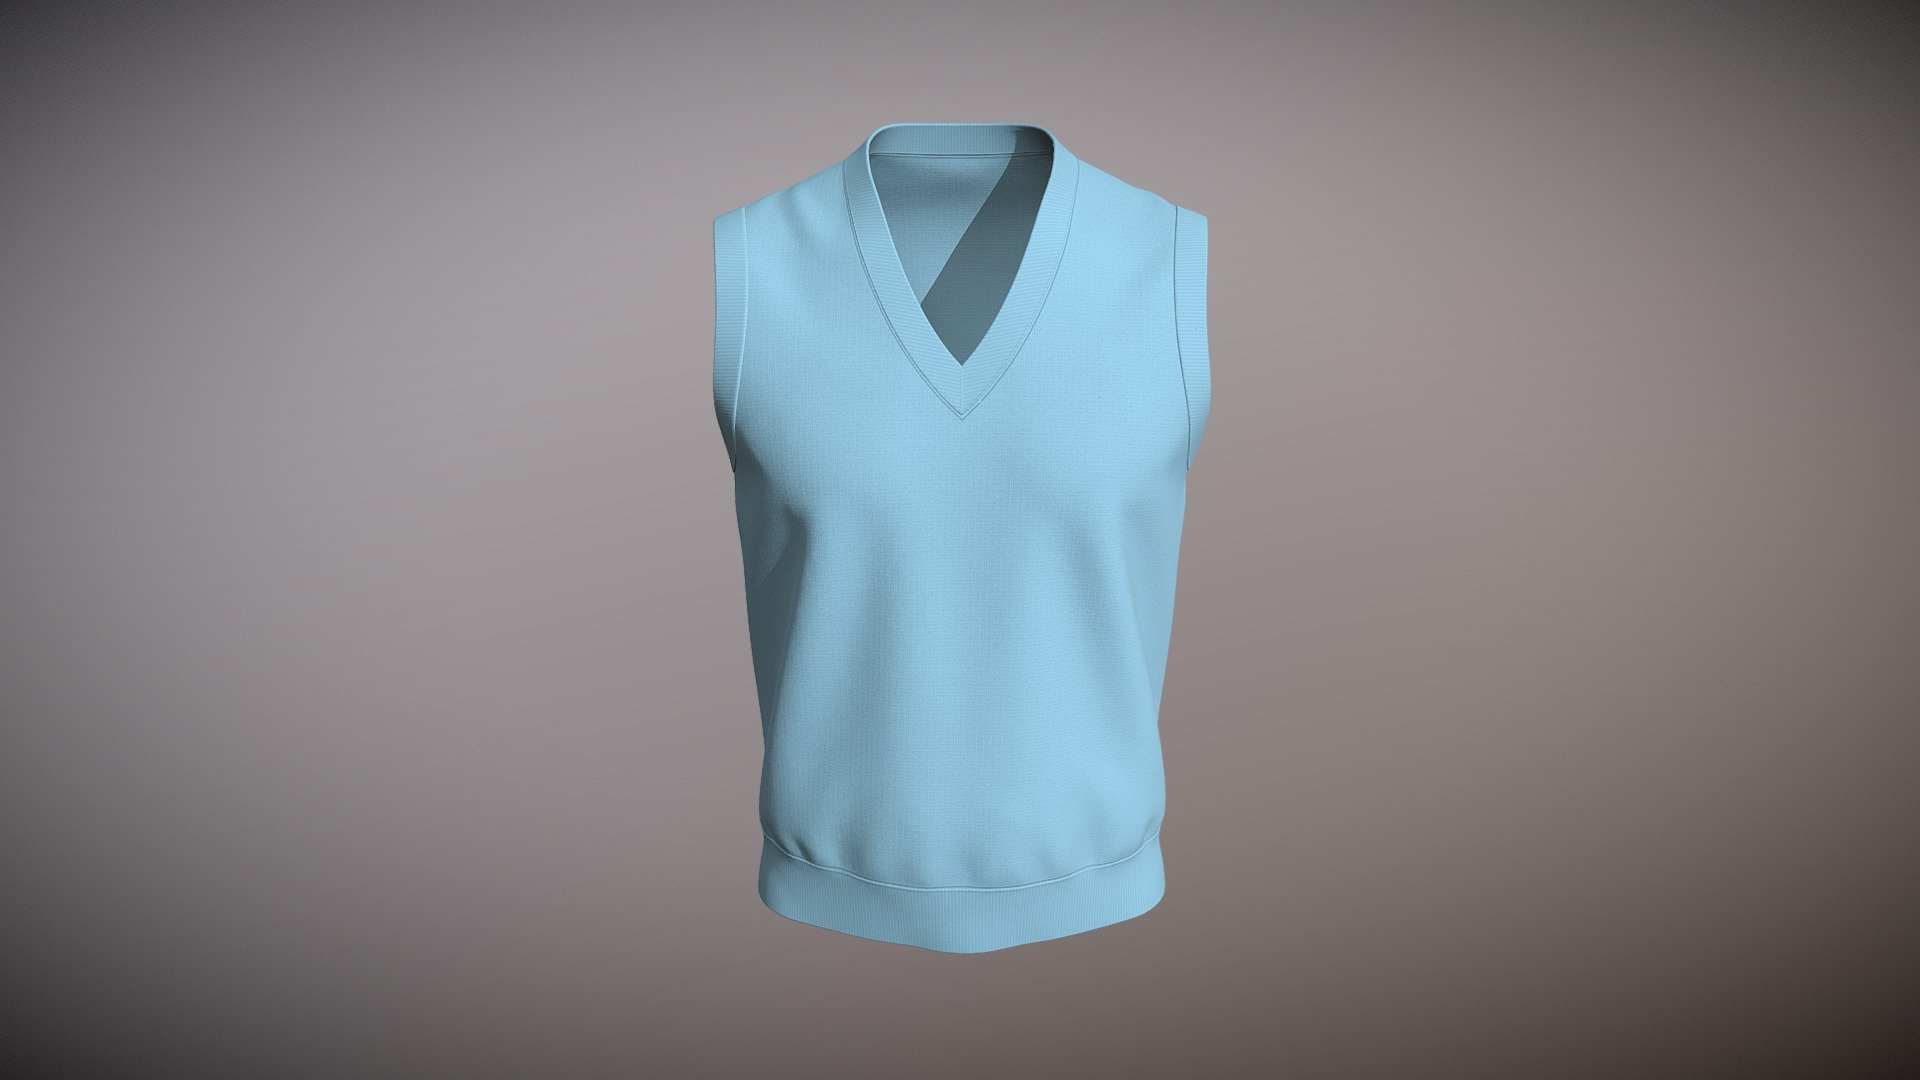 Cloth Title = V-Neck Knitted Vest 

SKU = DG100037 

Category = Men 

Product Type = Vest 

Cloth Length = Regular 

Body Fit = Loose Fit 

Occasion = Outerwear 

Sleeve Style = Set In Sleeve  


Our Services:

3D Apparel Design.

OBJ,FBX,GLTF Making with High/Low Poly.

Fabric Digitalization.

Mockup making.

3D Teck Pack.

Pattern Making.

2D Illustration.

Cloth Animation and 360 Spin Video.


Contact us:- 

Email: info@digitalfashionwear.com 

Website: https://digitalfashionwear.com 

WhatsApp No: +8801759350445 


We designed all the types of cloth specially focused on product visualization, e-commerce, fitting, and production. 

We will design: 

T-shirts 

Polo shirts 

Hoodies 

Sweatshirt 

Jackets 

Shirts 

TankTops 

Trousers 

Bras 

Underwear 

Blazer 

Aprons 

Leggings 

and All Fashion items. 





Our goal is to make sure what we provide you, meets your demand 3d model